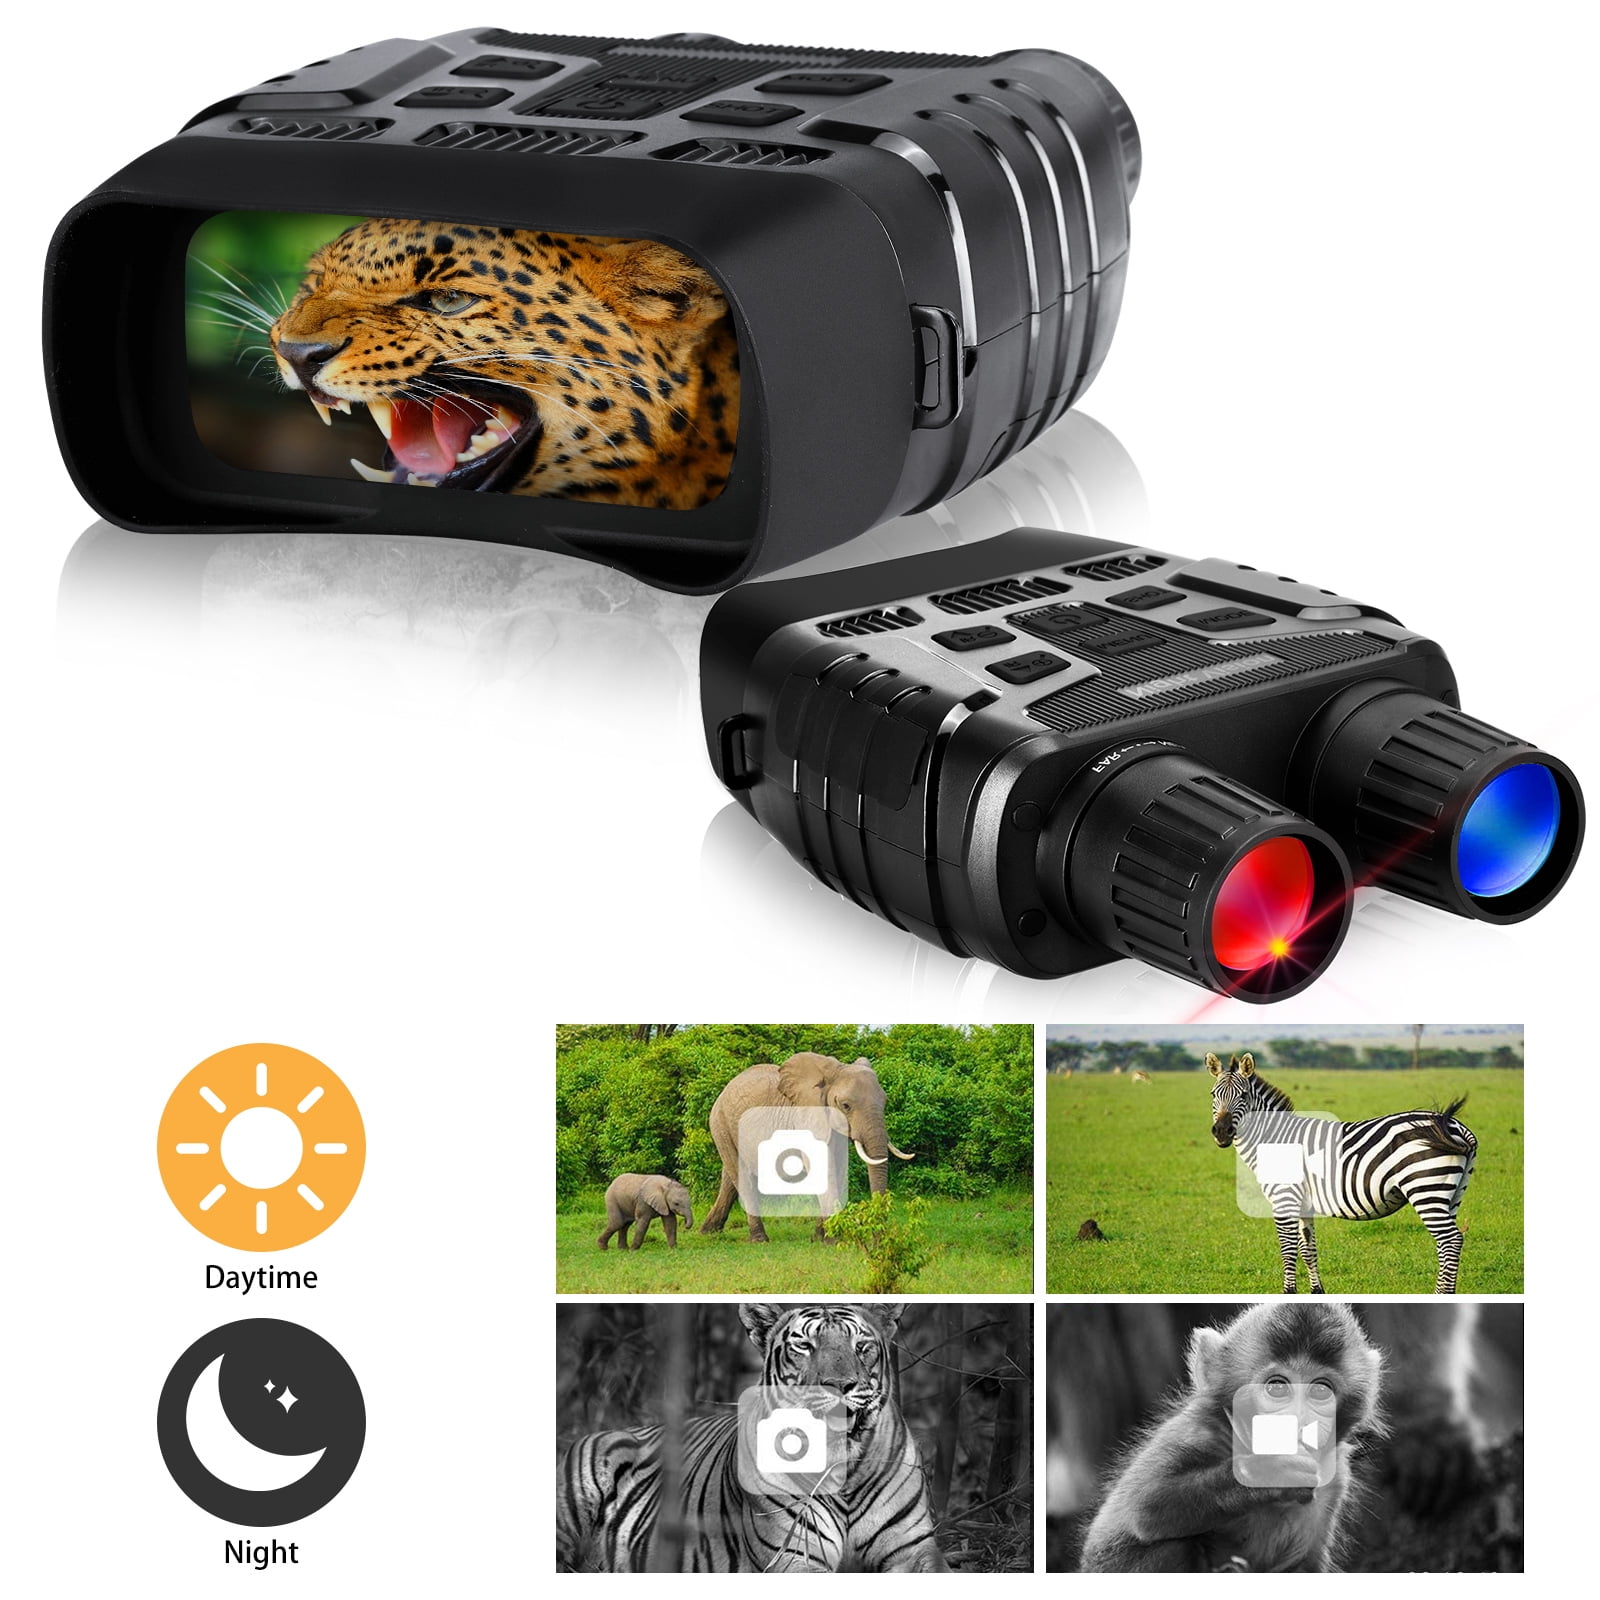 COBER Night Vision Goggles Night Vision Binoculars for Complete Darkness Digital Infrared Binoculars with Night Vision with 32 GB Memory Card 